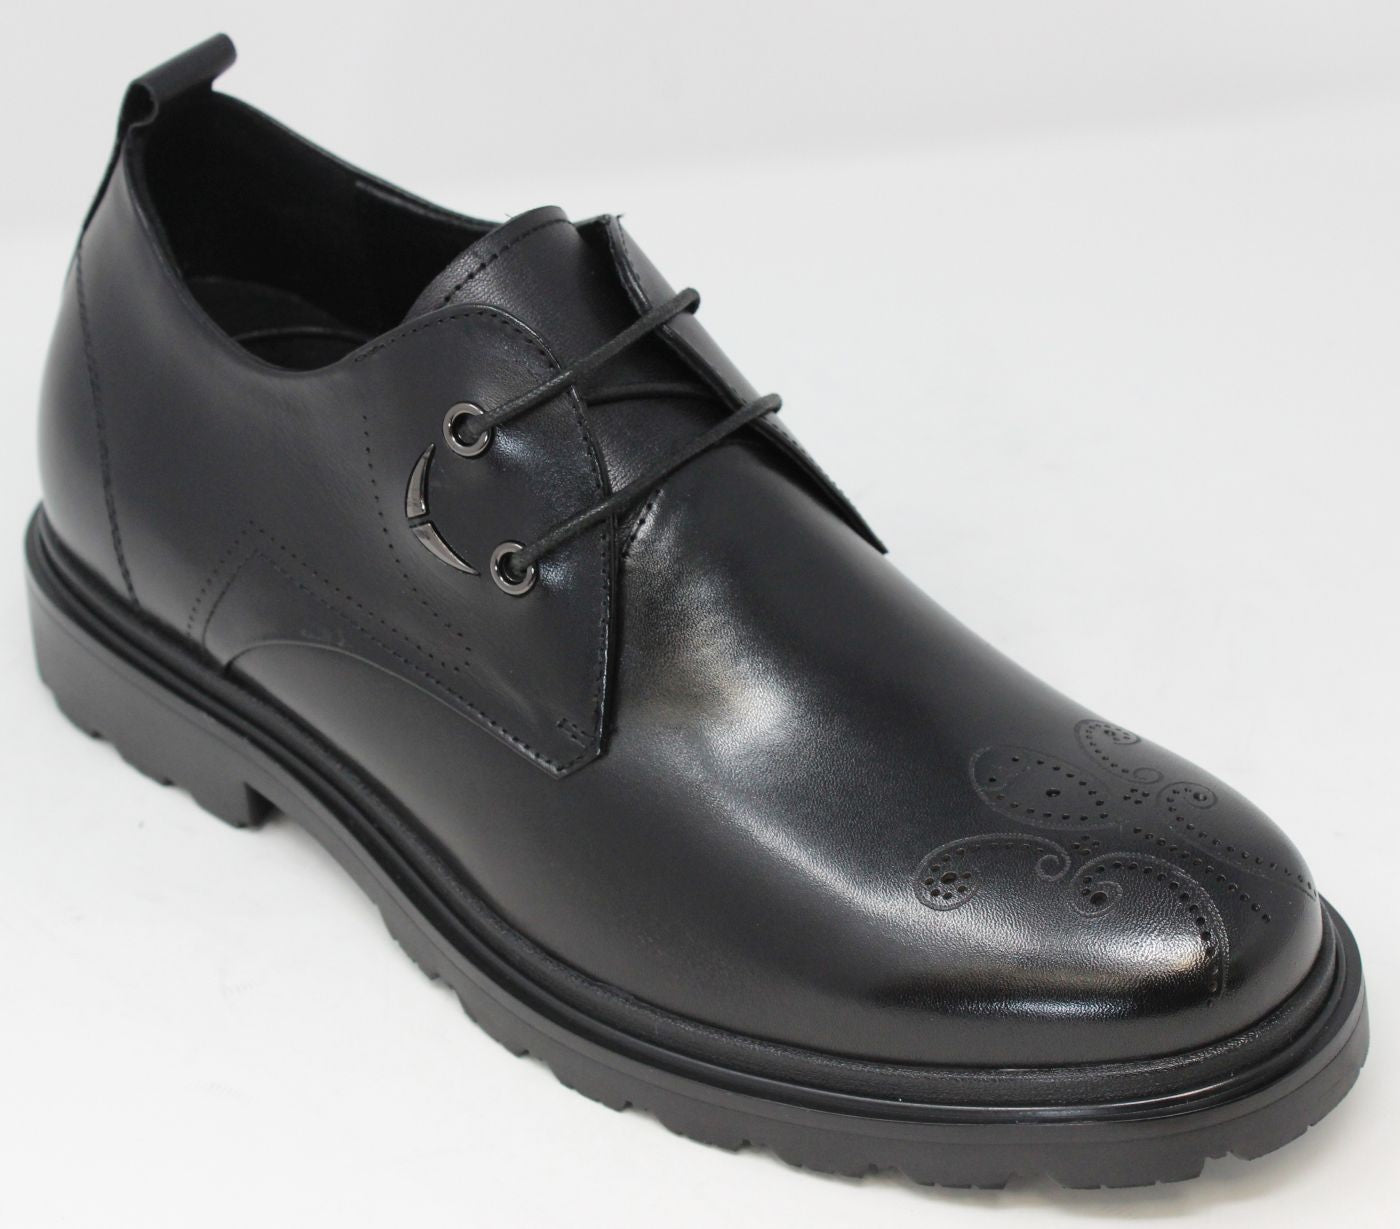 Elevator shoes height increase FSD0048 - 2.8 Inches Taller (BLACK) - Size 7.5 Only